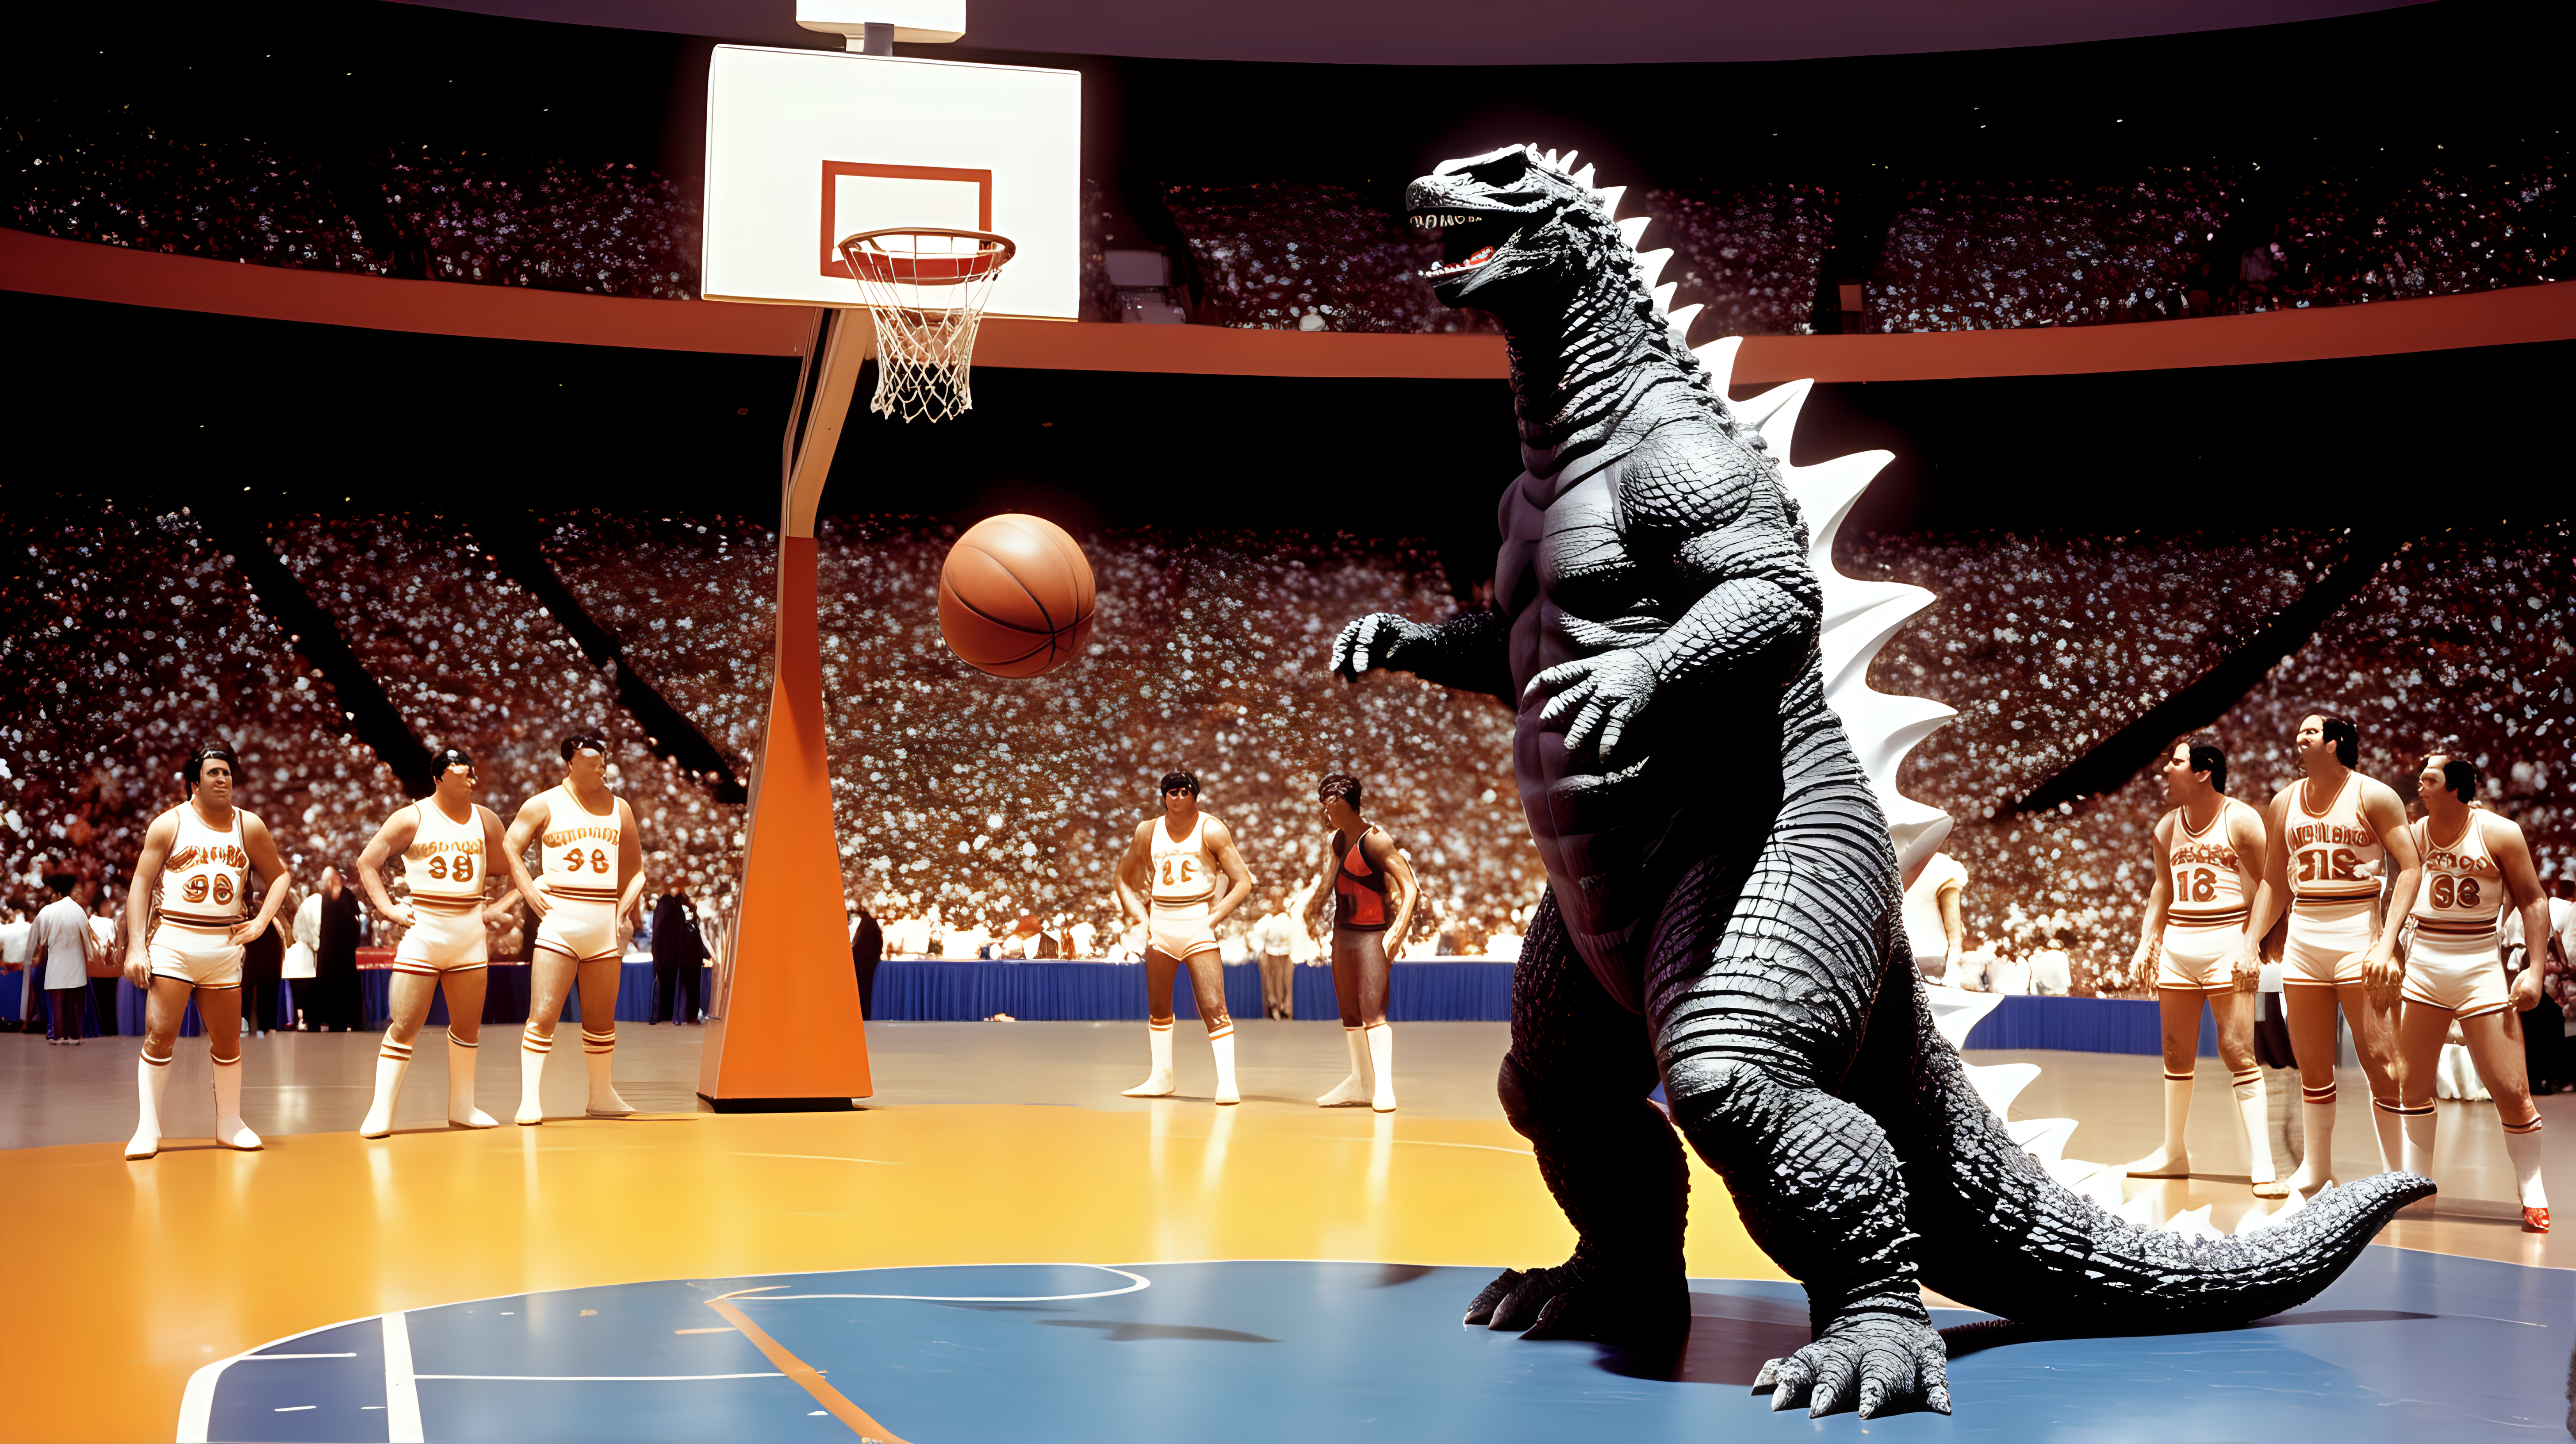 Godzilla playing basketball in the Astrodome